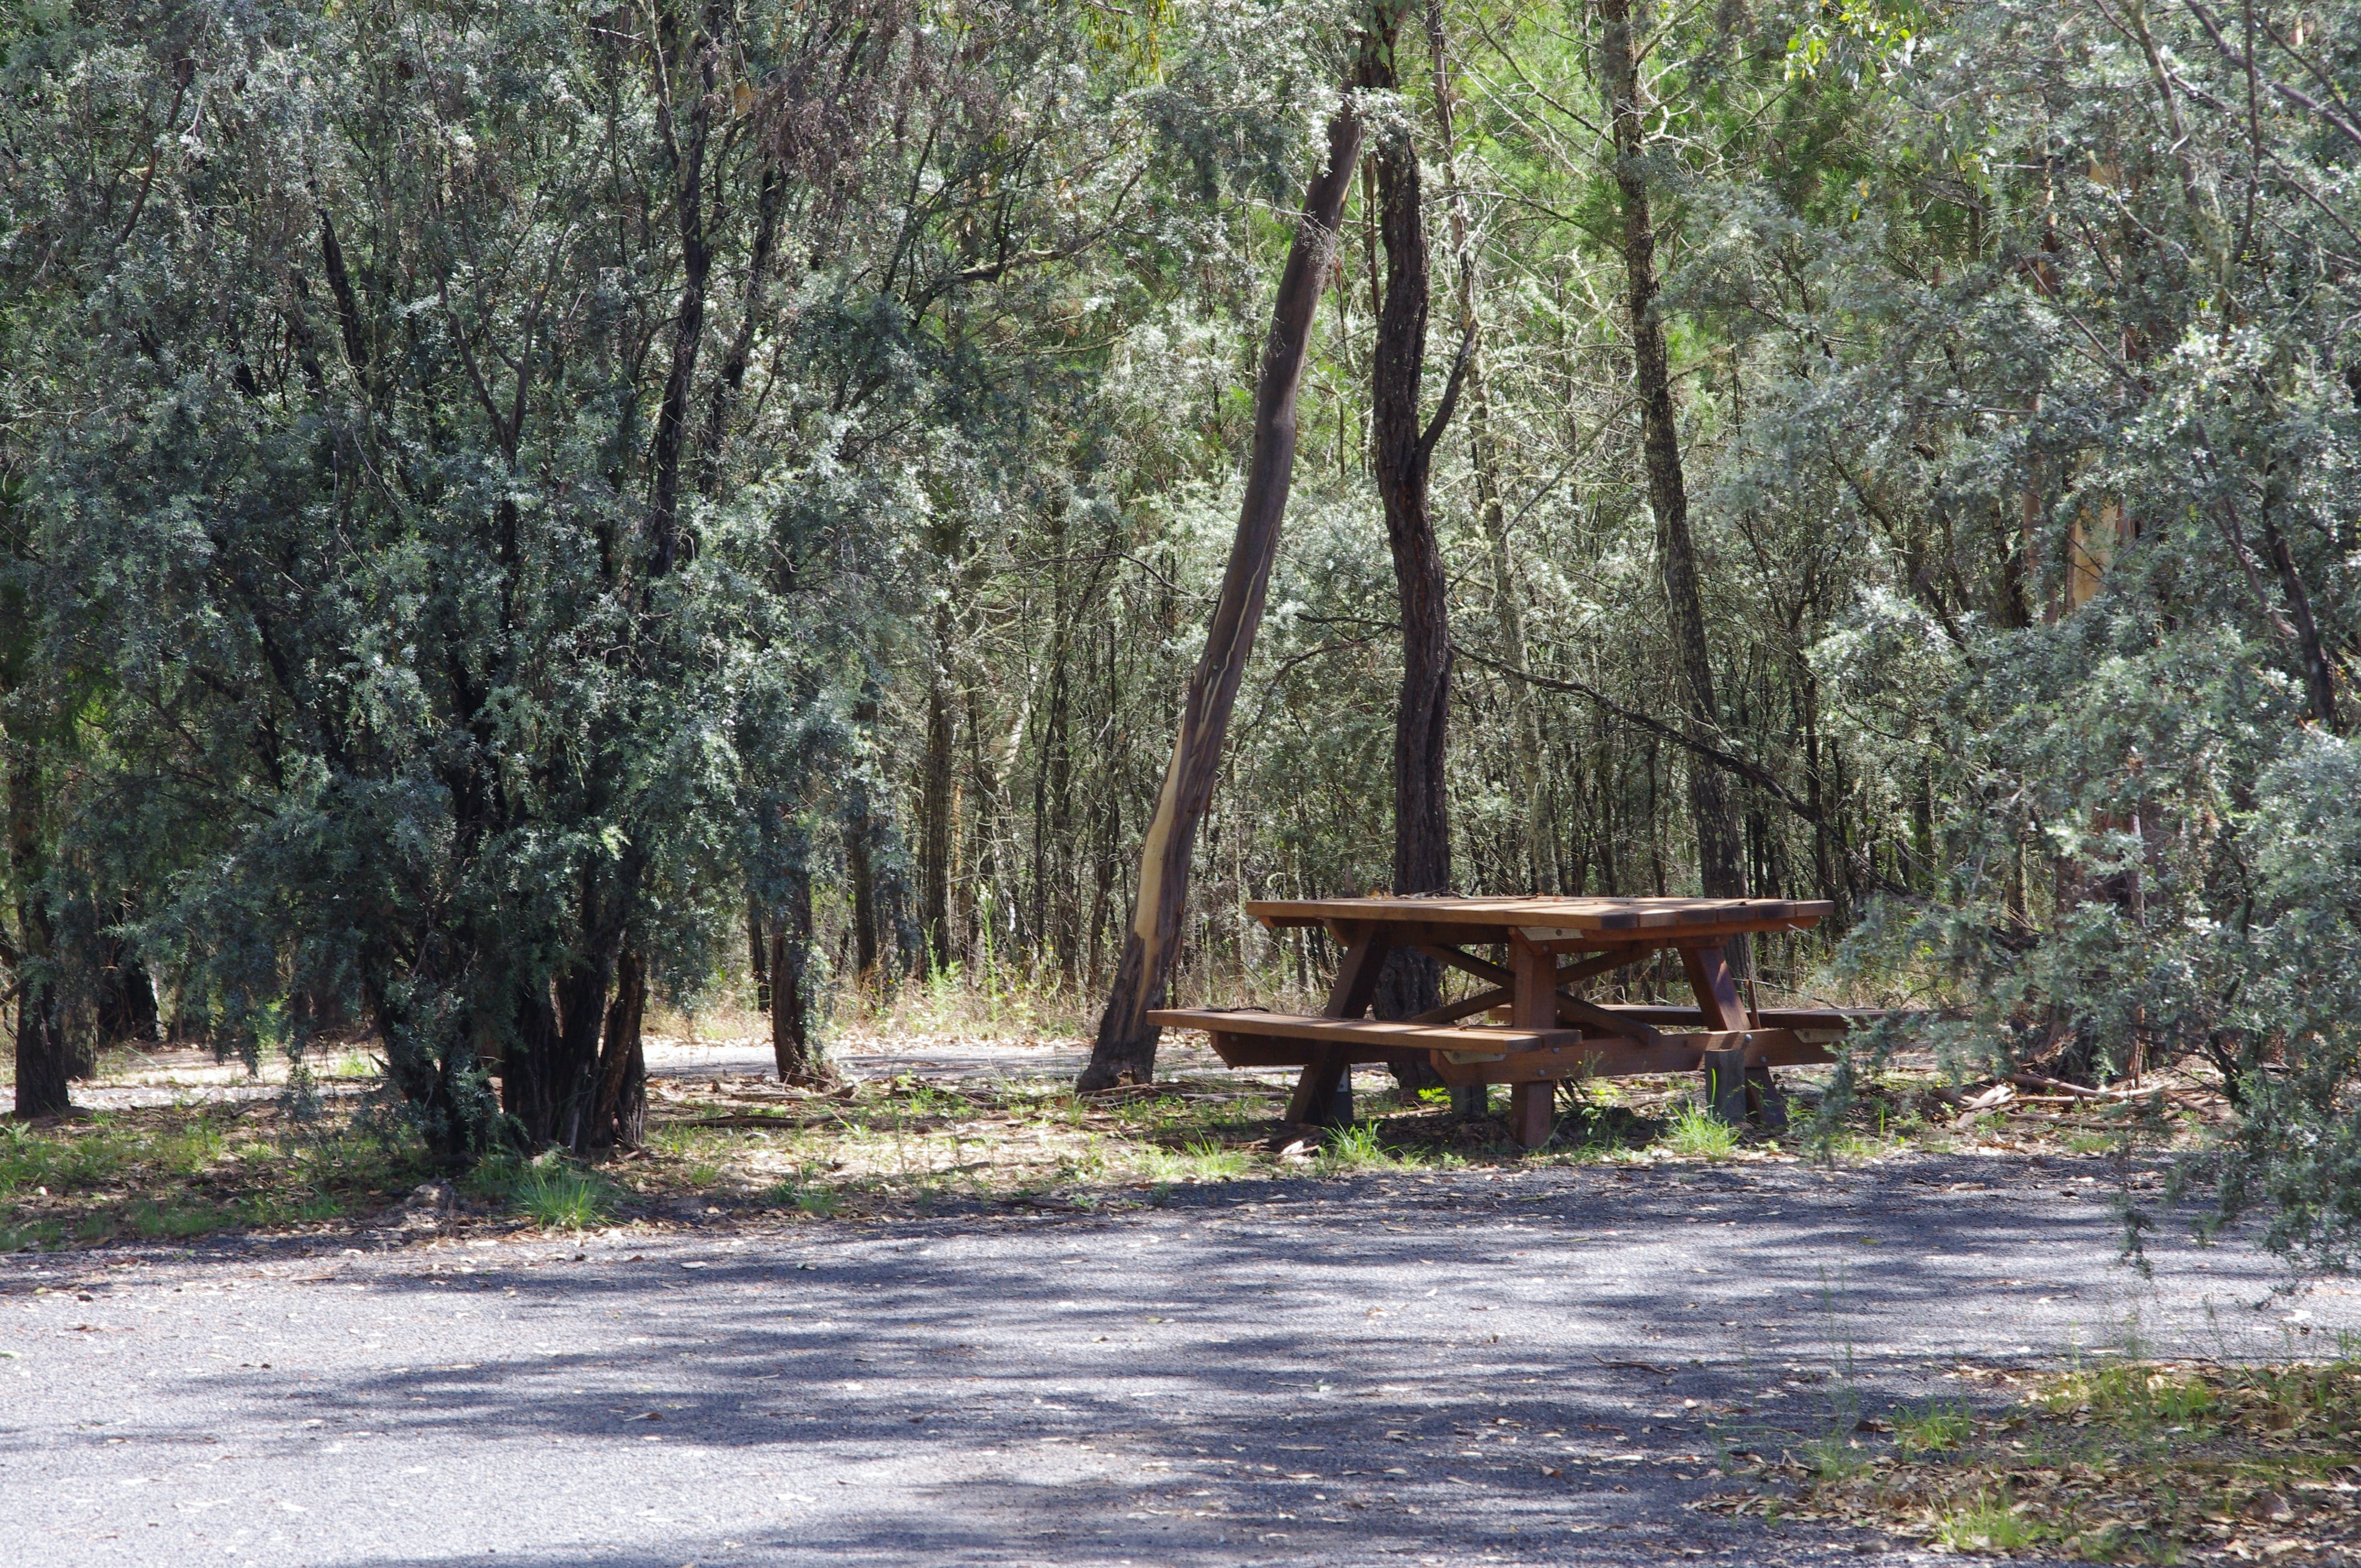 Goonoowigall State Conservation Area - Nambucca Heads Accommodation